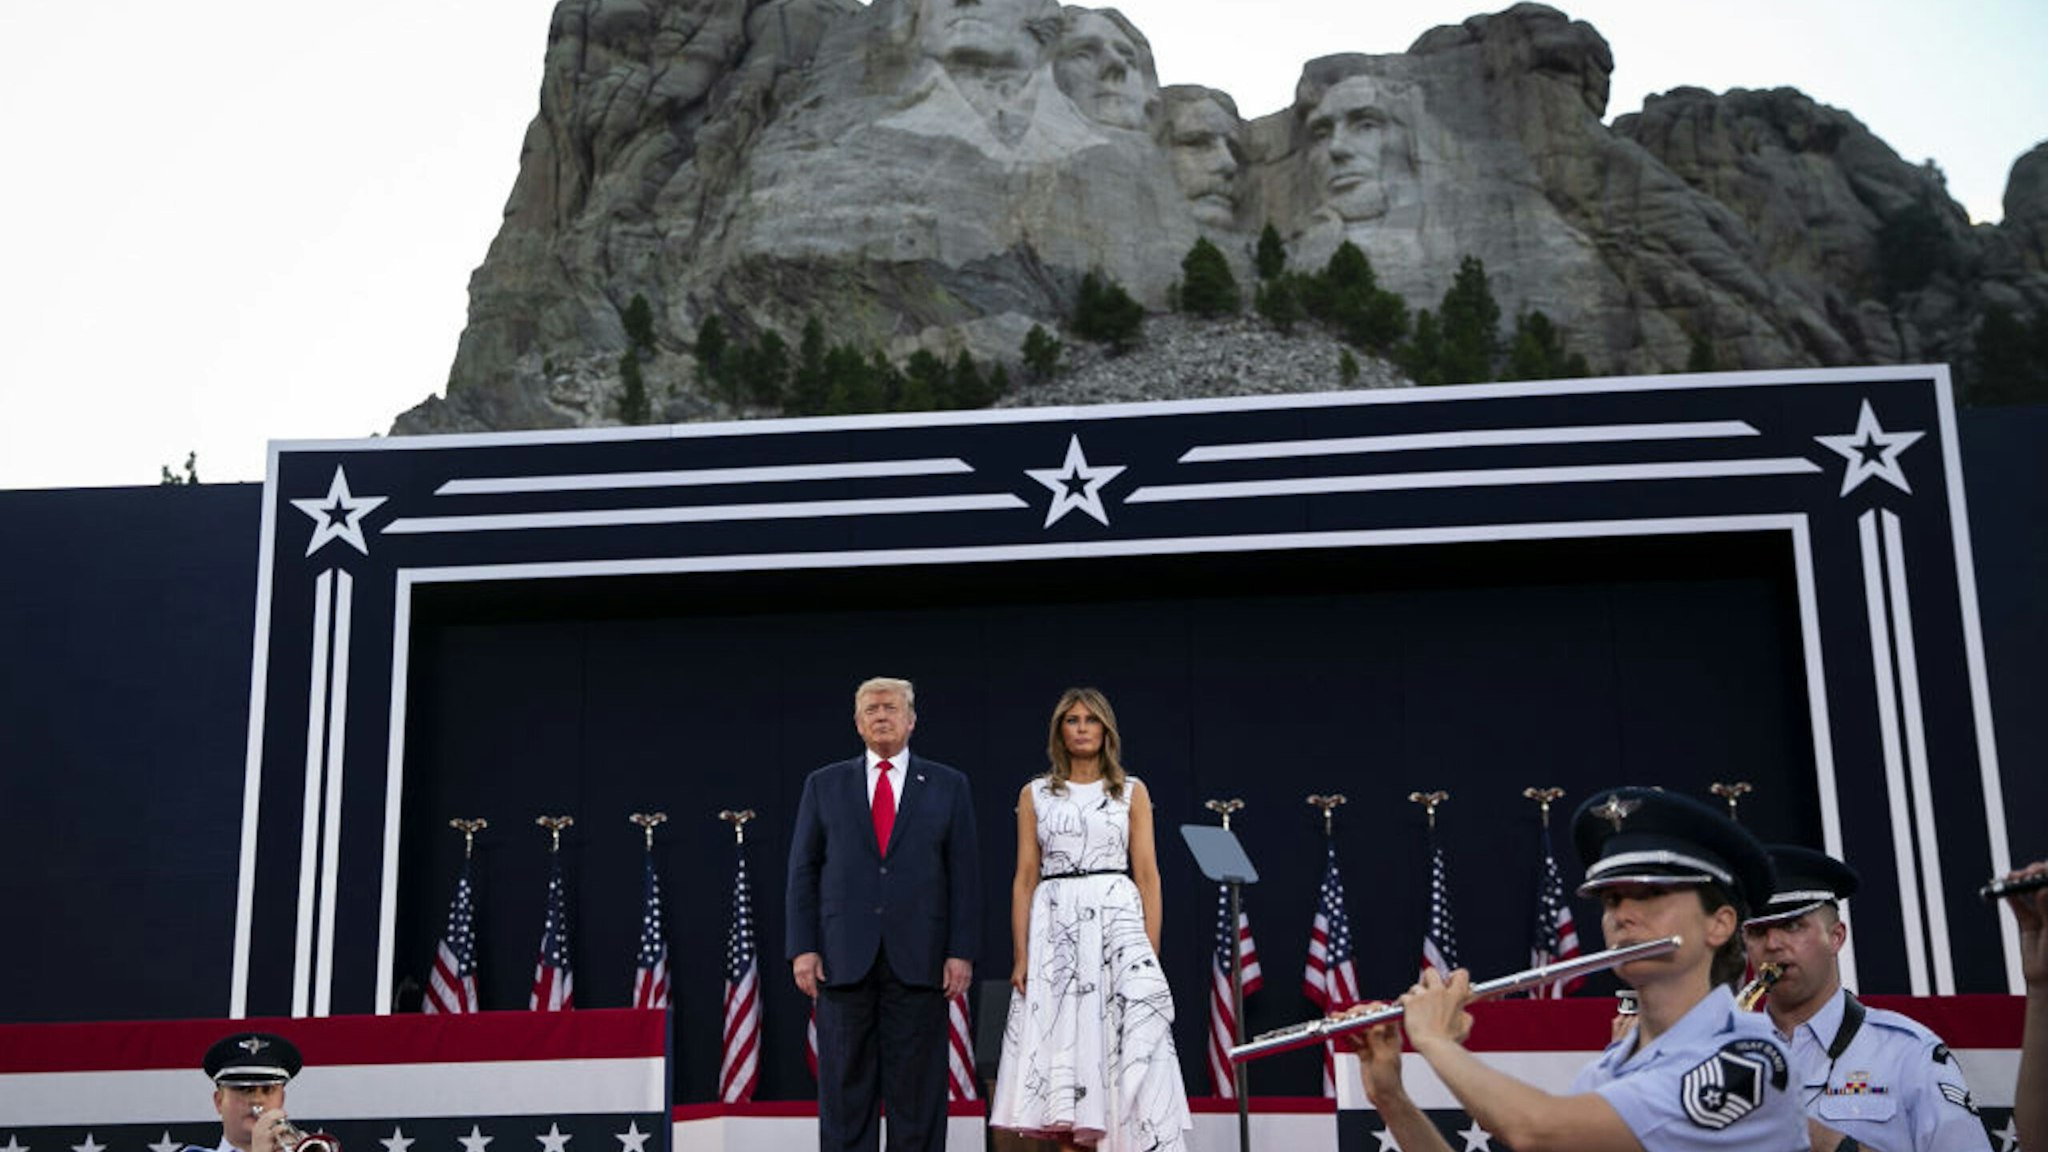 U.S. President Donald Trump, left, and First Lady Melania Trump attend an event at Mount Rushmore National Memorial in Keystone, South Dakota, U.S., on Friday, July 3, 2020. The early Independence Day celebration, which will feature a military flyover and the first fireworks in more than a decade, is expected to include about 7,500 ticketed guests who won't be required to wear masks or socially distance despite a spike in U.S. coronavirus cases.